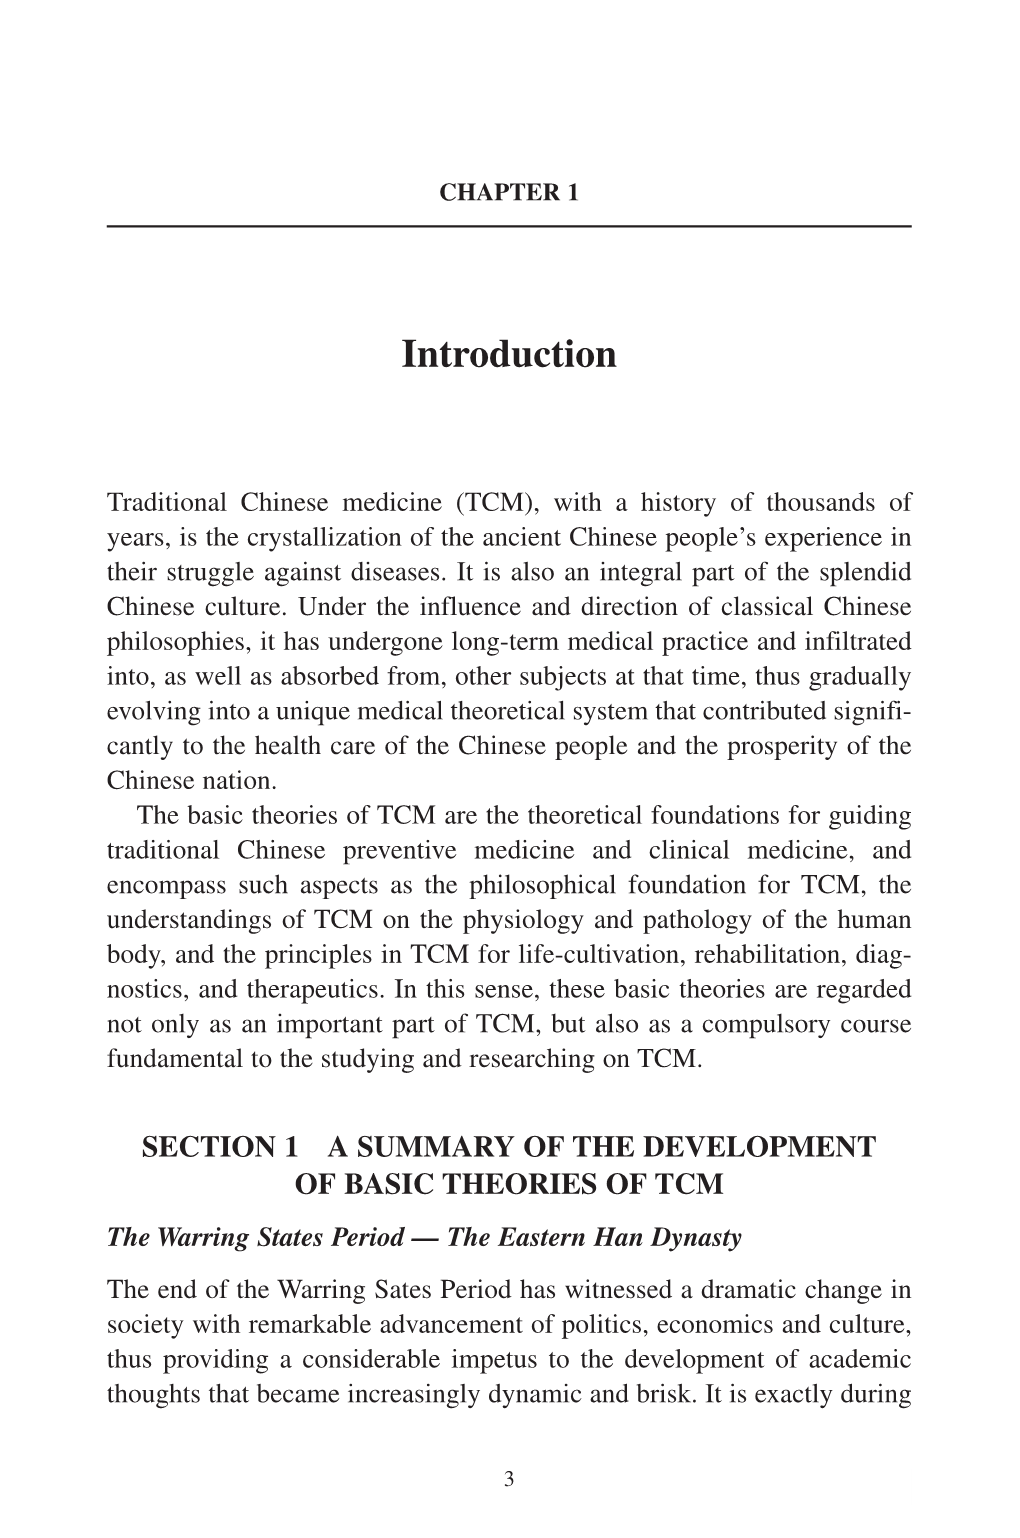 Fundamentals of Traditional Chinese Medicine (459 Pages)